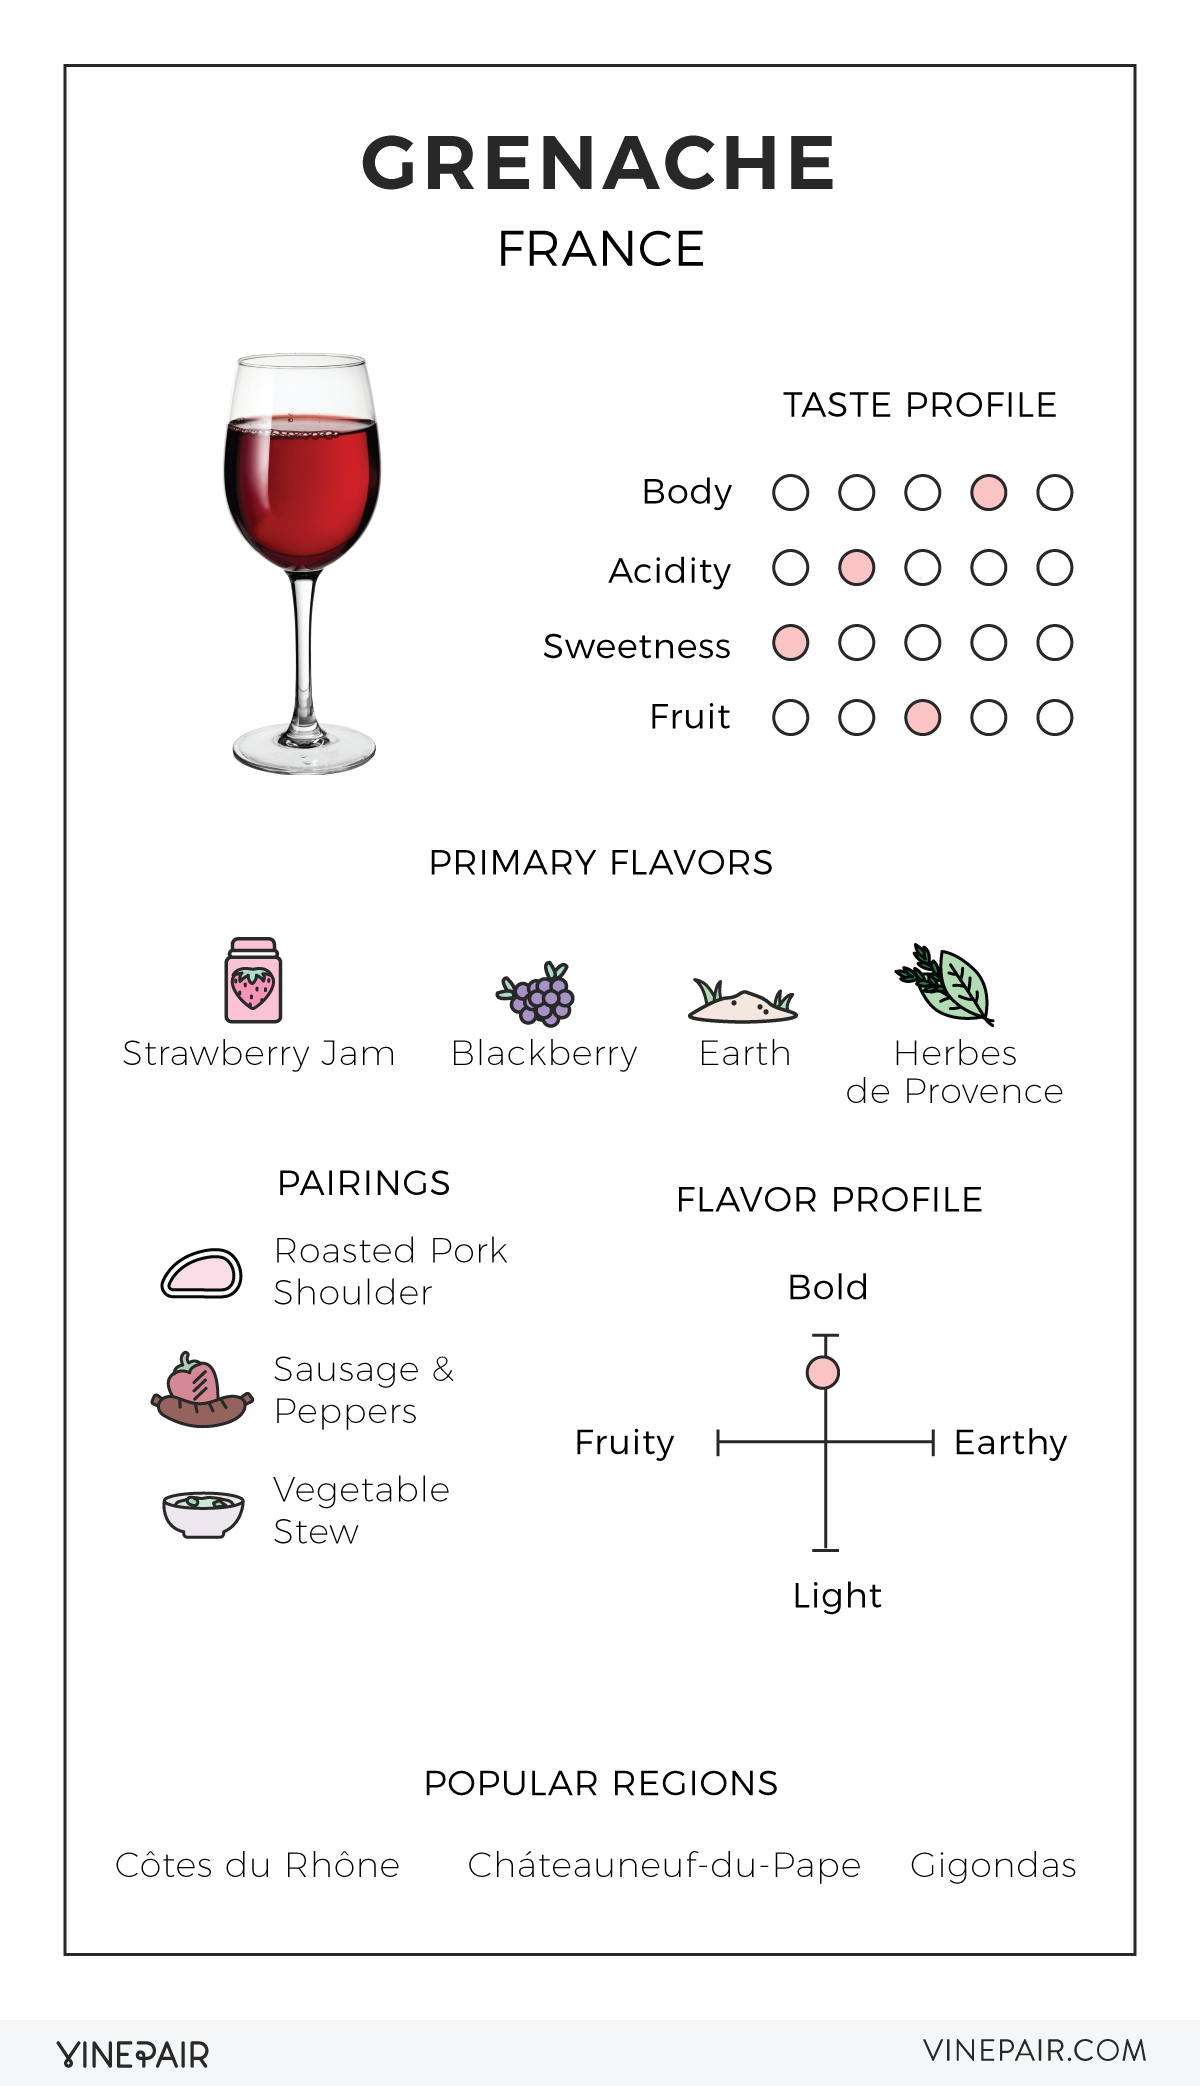 An illustrated guide to Grenache